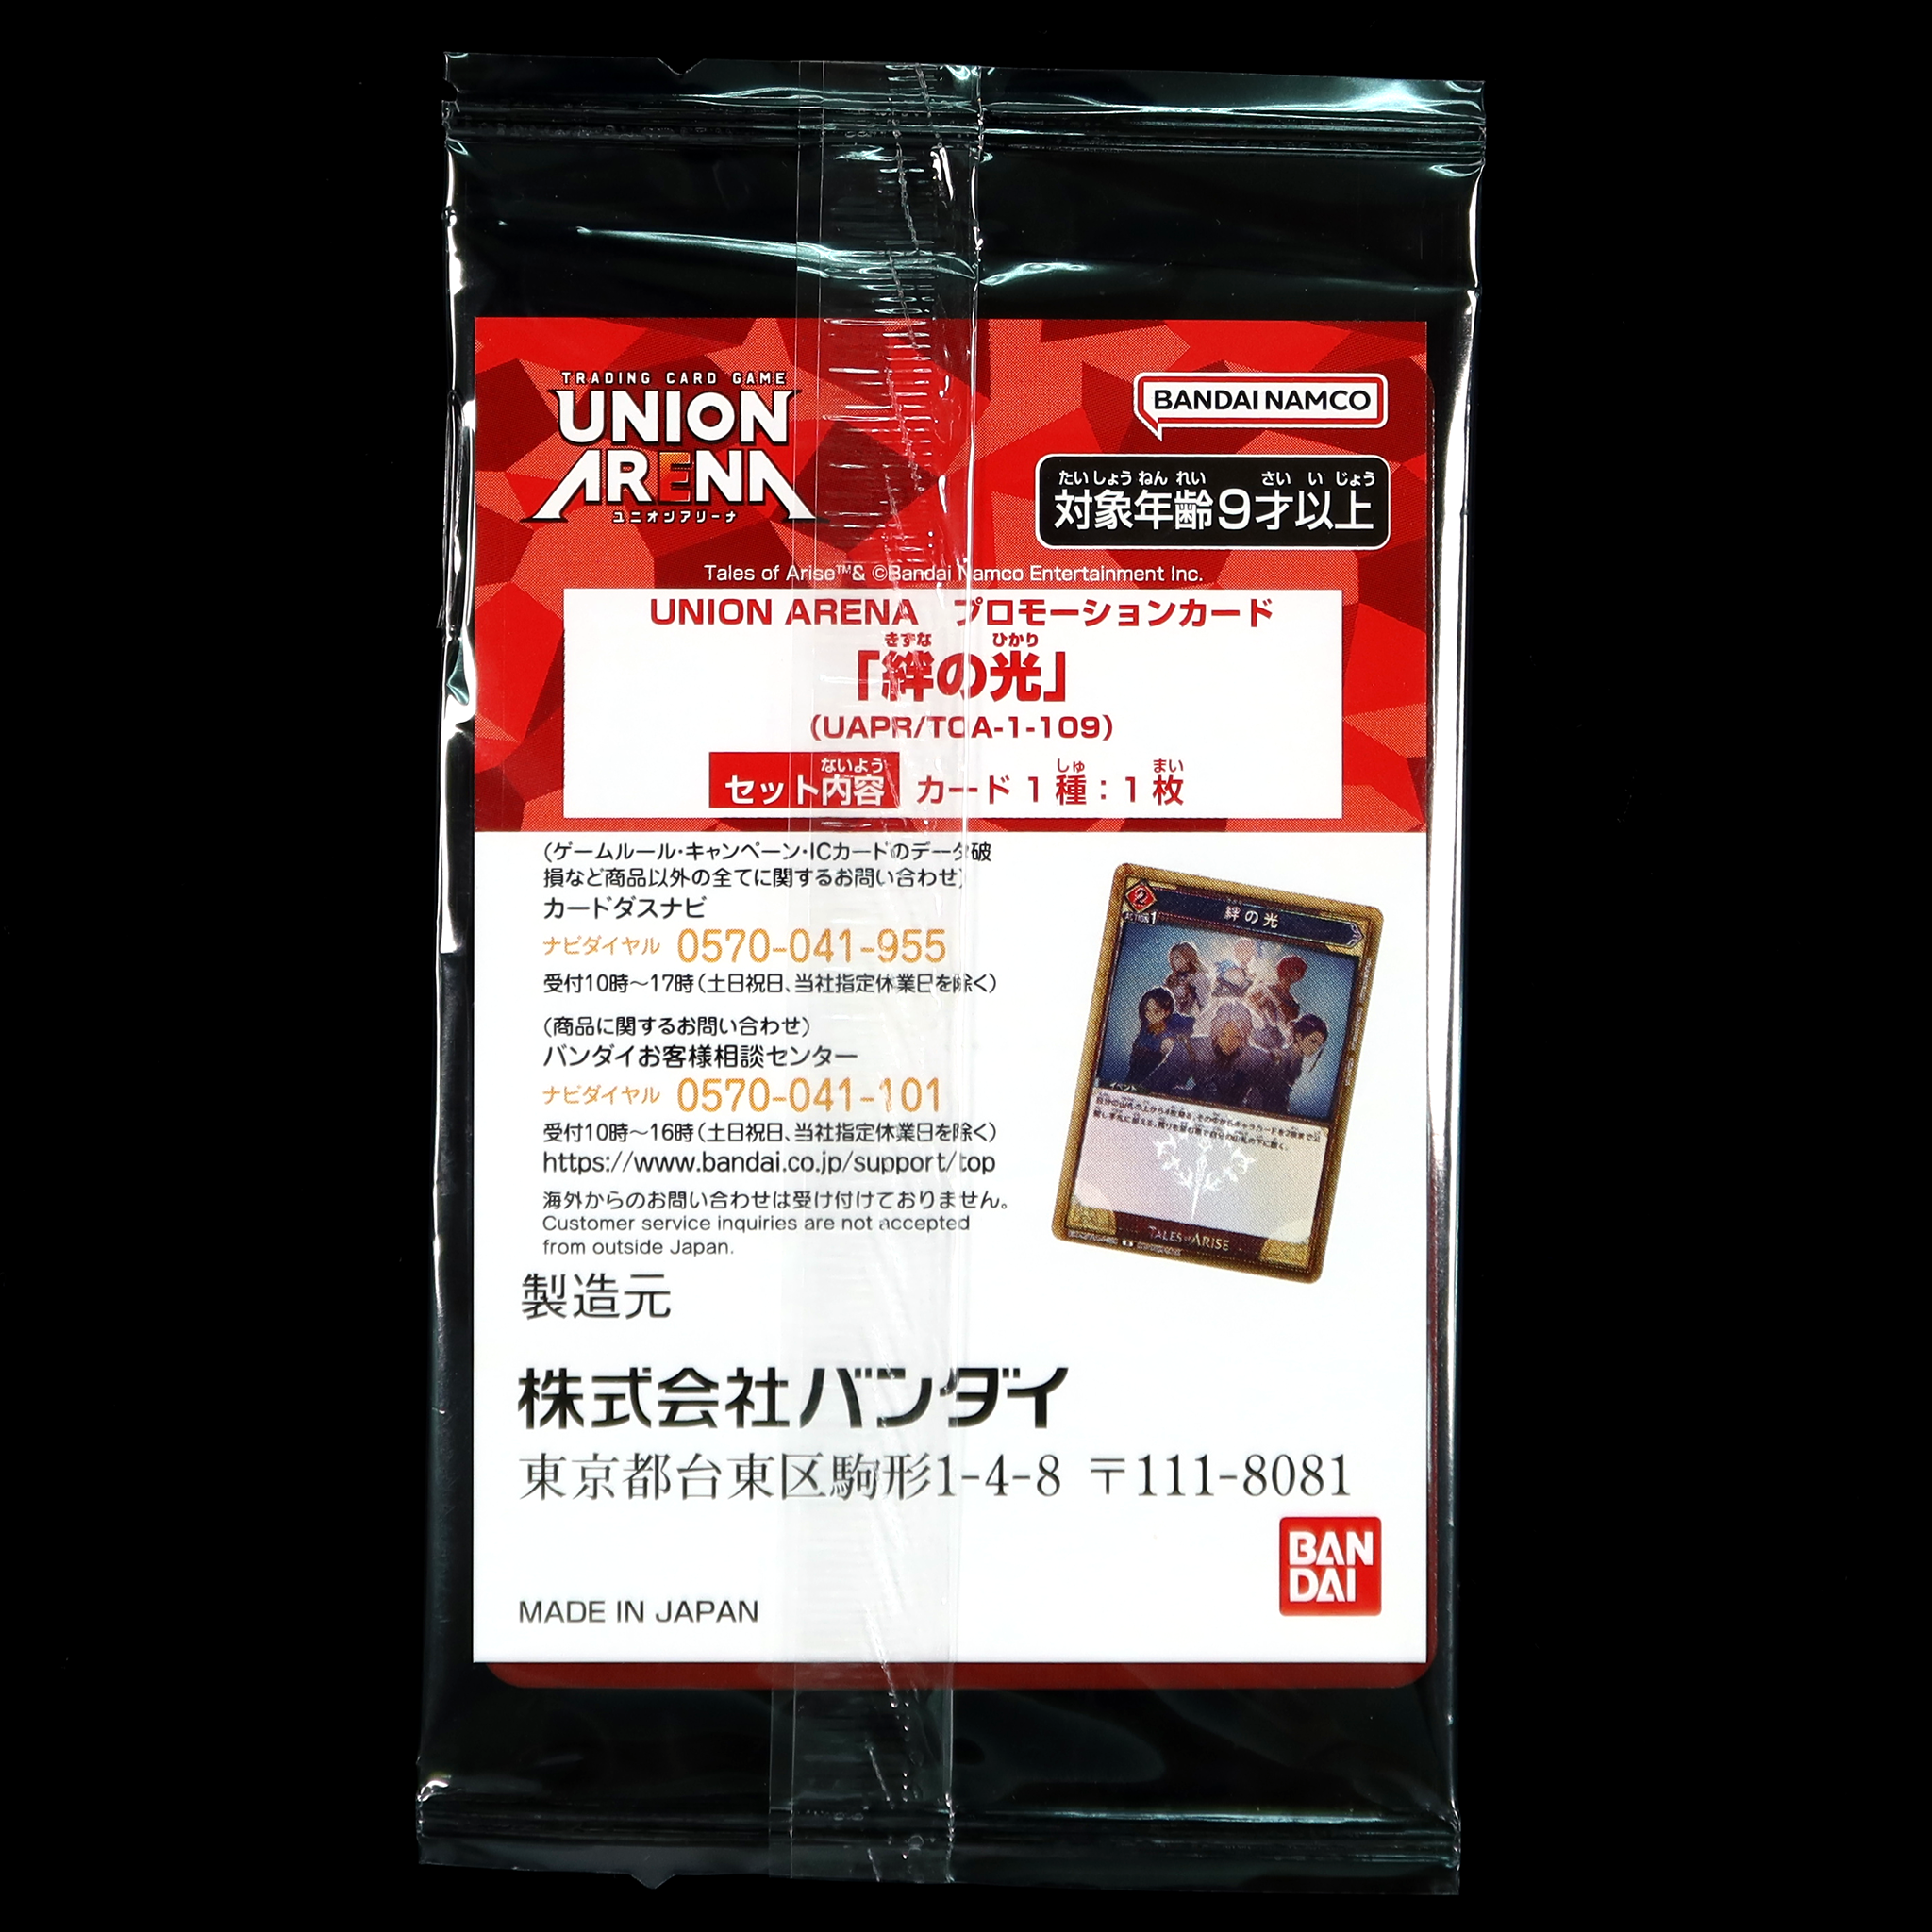 TRADING CARD GAME UNION ARENA UAPR/TOA-1-109 in blister